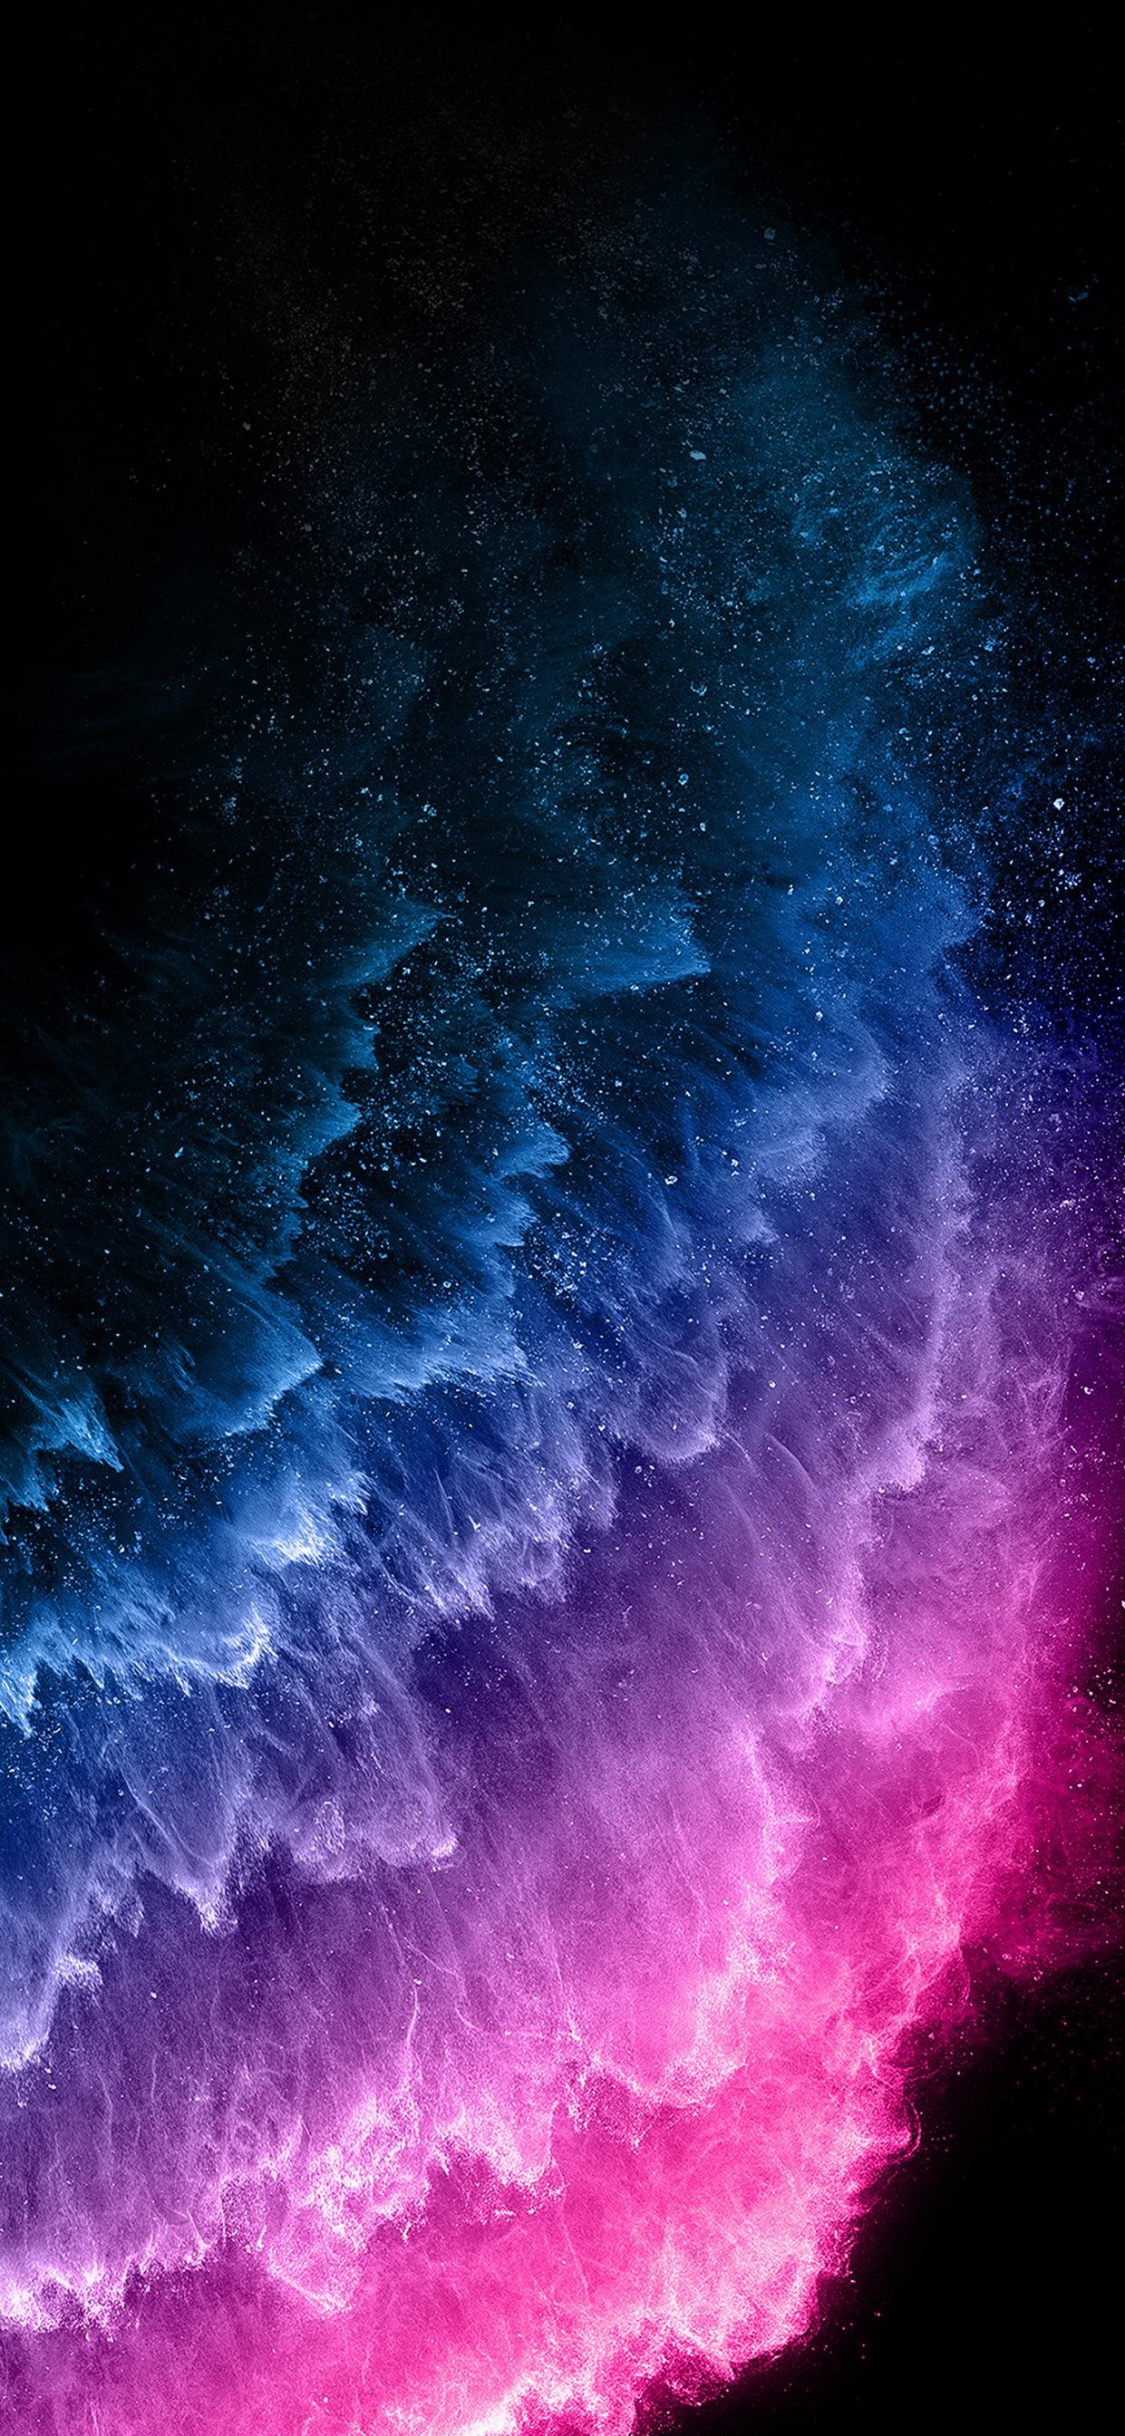 IOS 11, Apple, Android, IOS, Atmosphère. Wallpaper in 1125x2436 Resolution